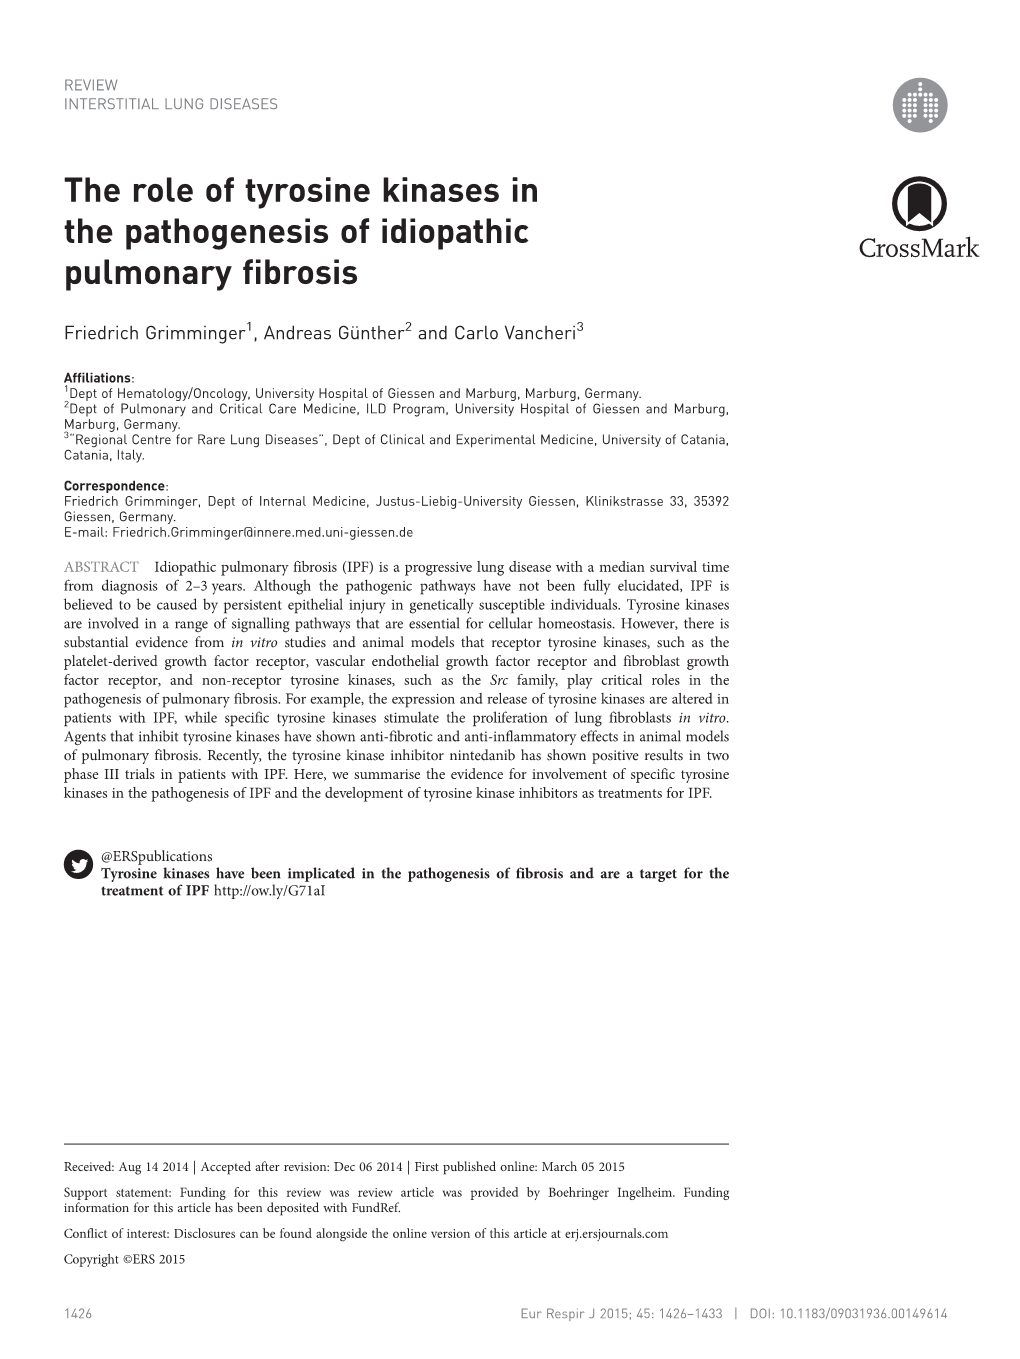 The Role of Tyrosine Kinases in The'pathogenesis of Idiopathic